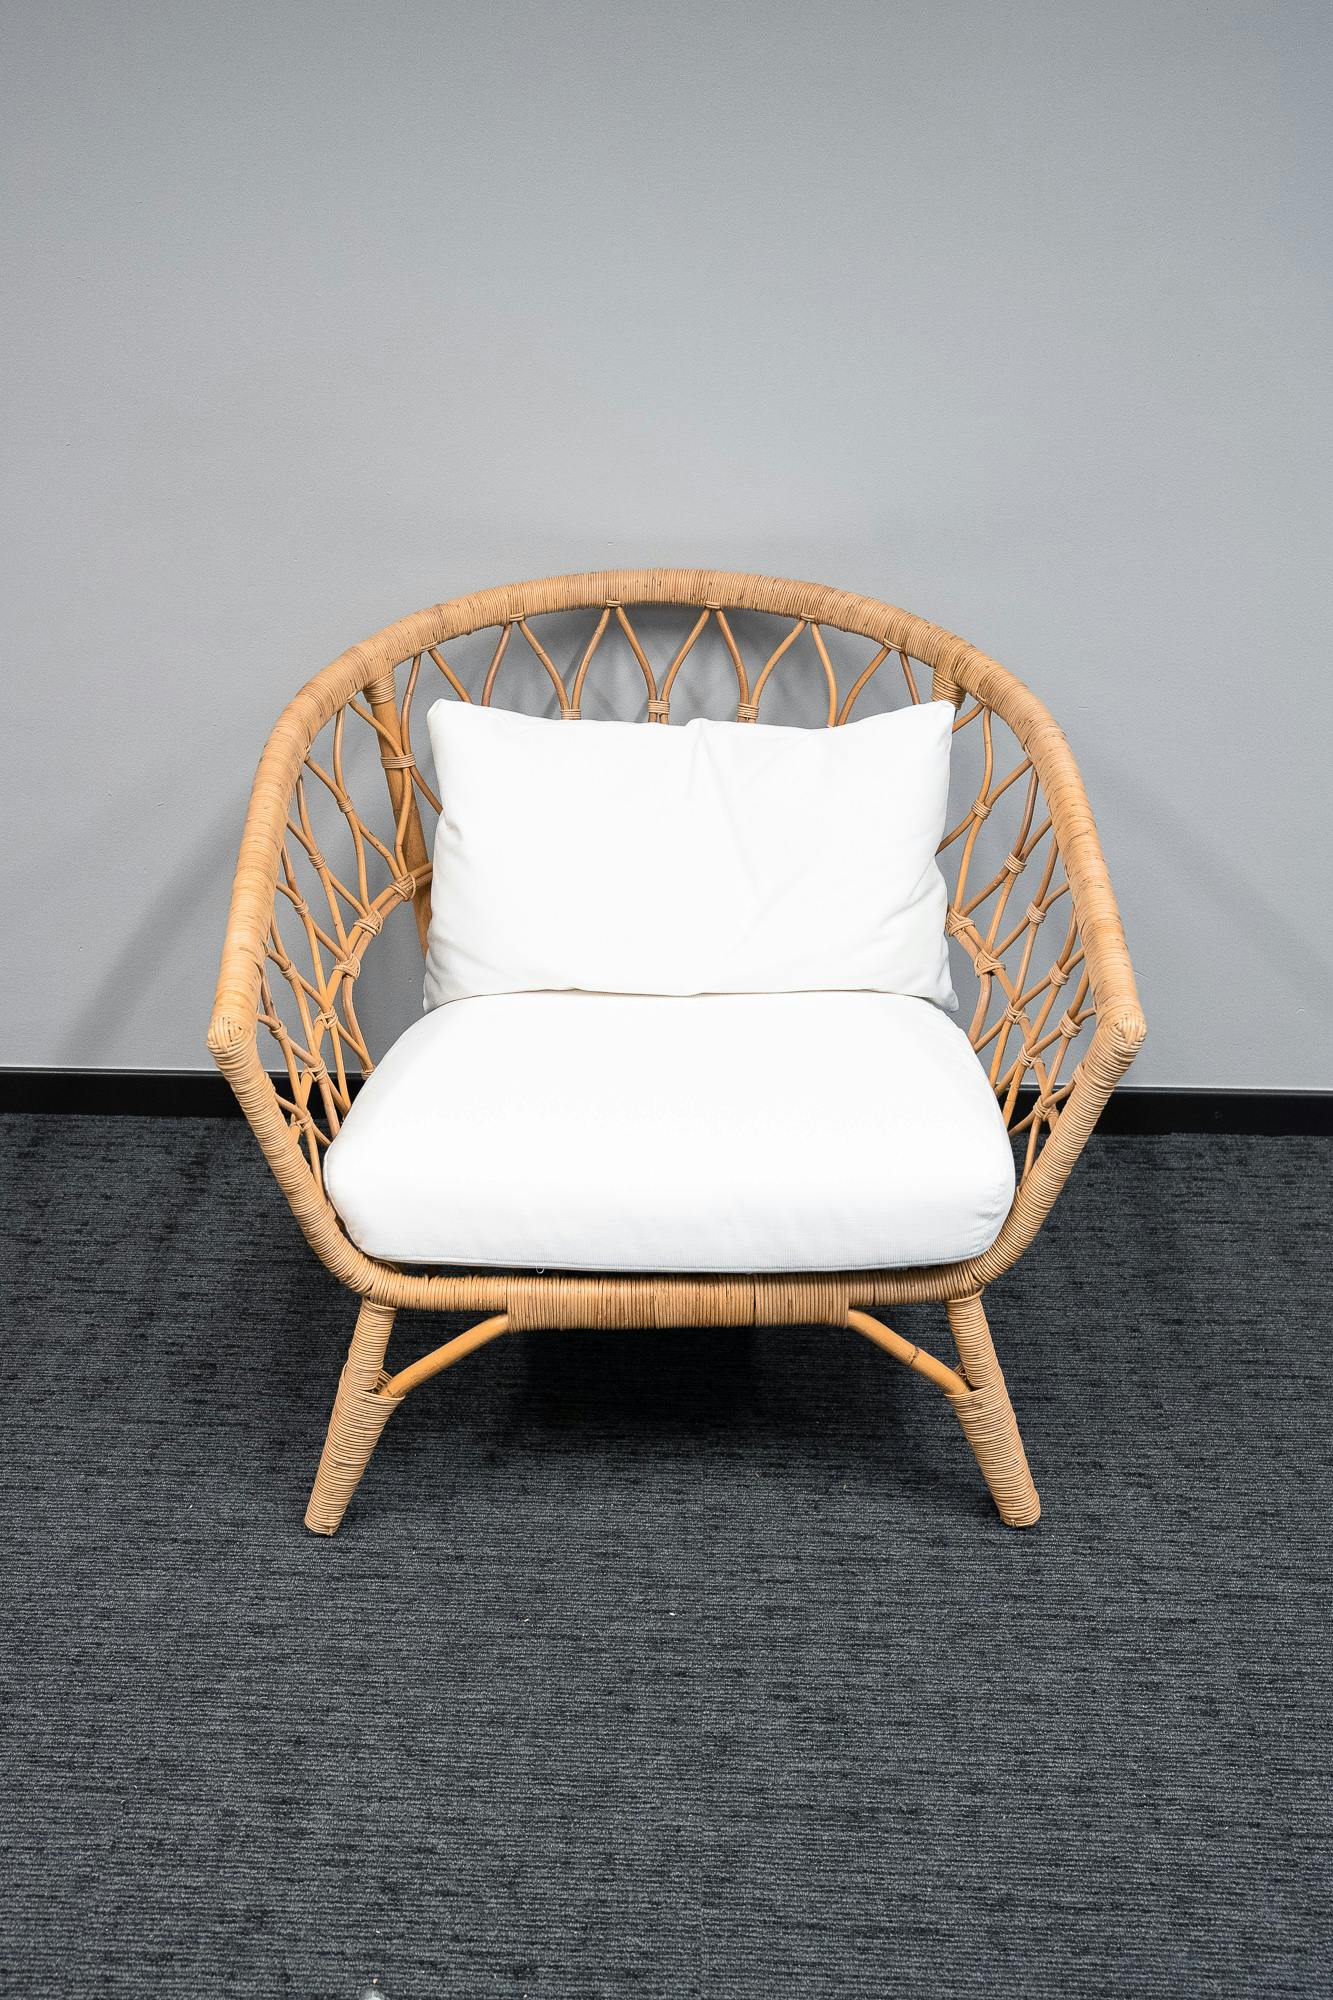 Wicker armchair with white cushions - Second hand quality "Armchairs and Couches" - Relieve Furniture